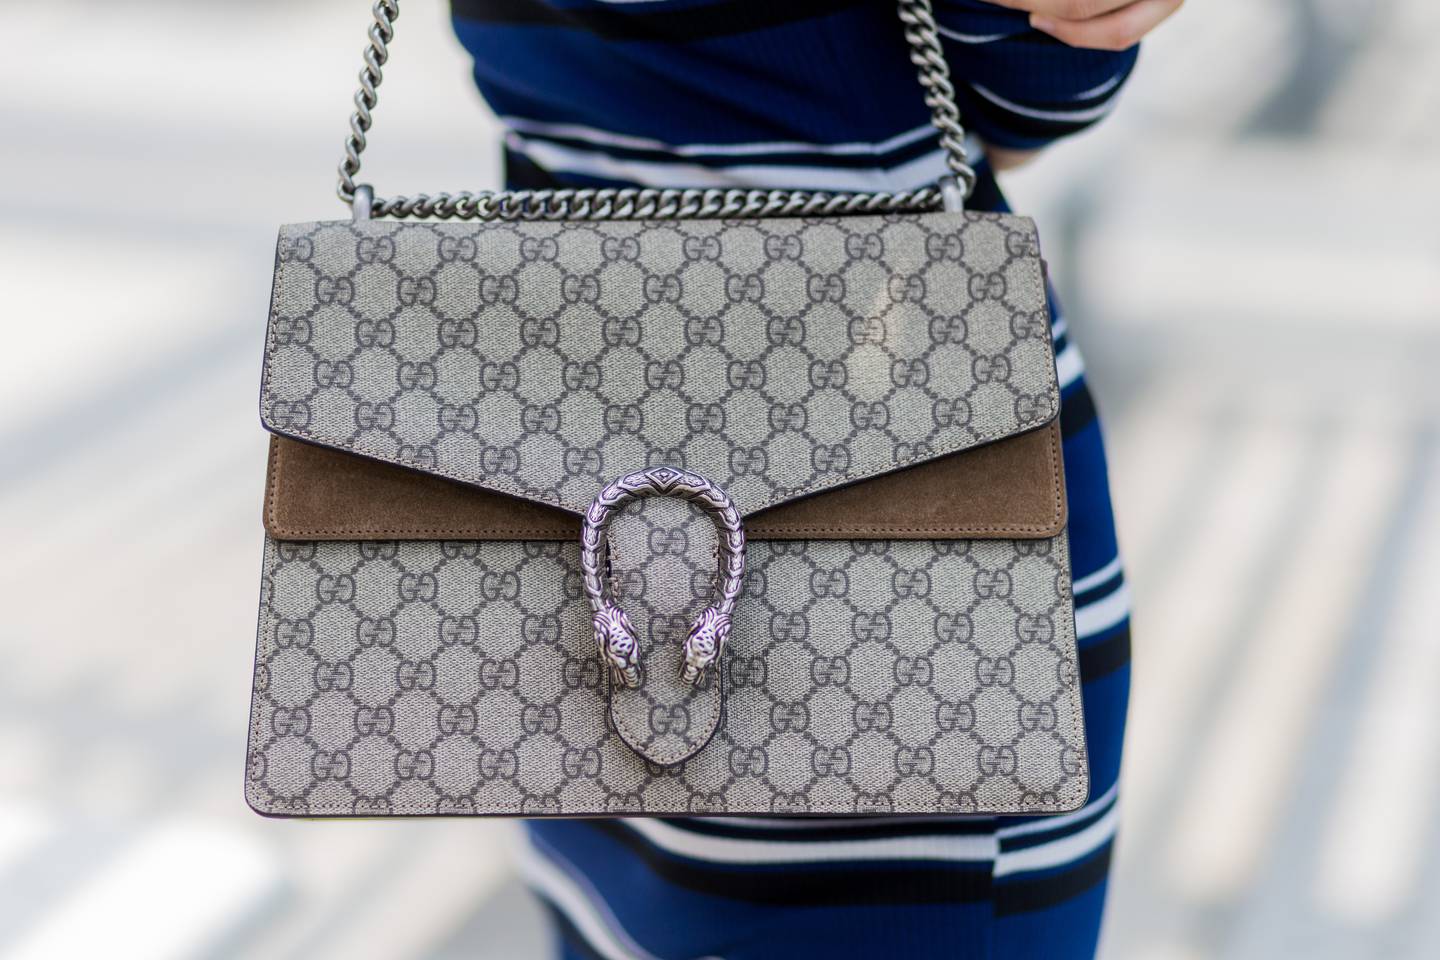 A digital version of Gucci’s Dionysus bag sold on Roblox’s platform for about $4,115. That is more than the price of the physical item. Getty